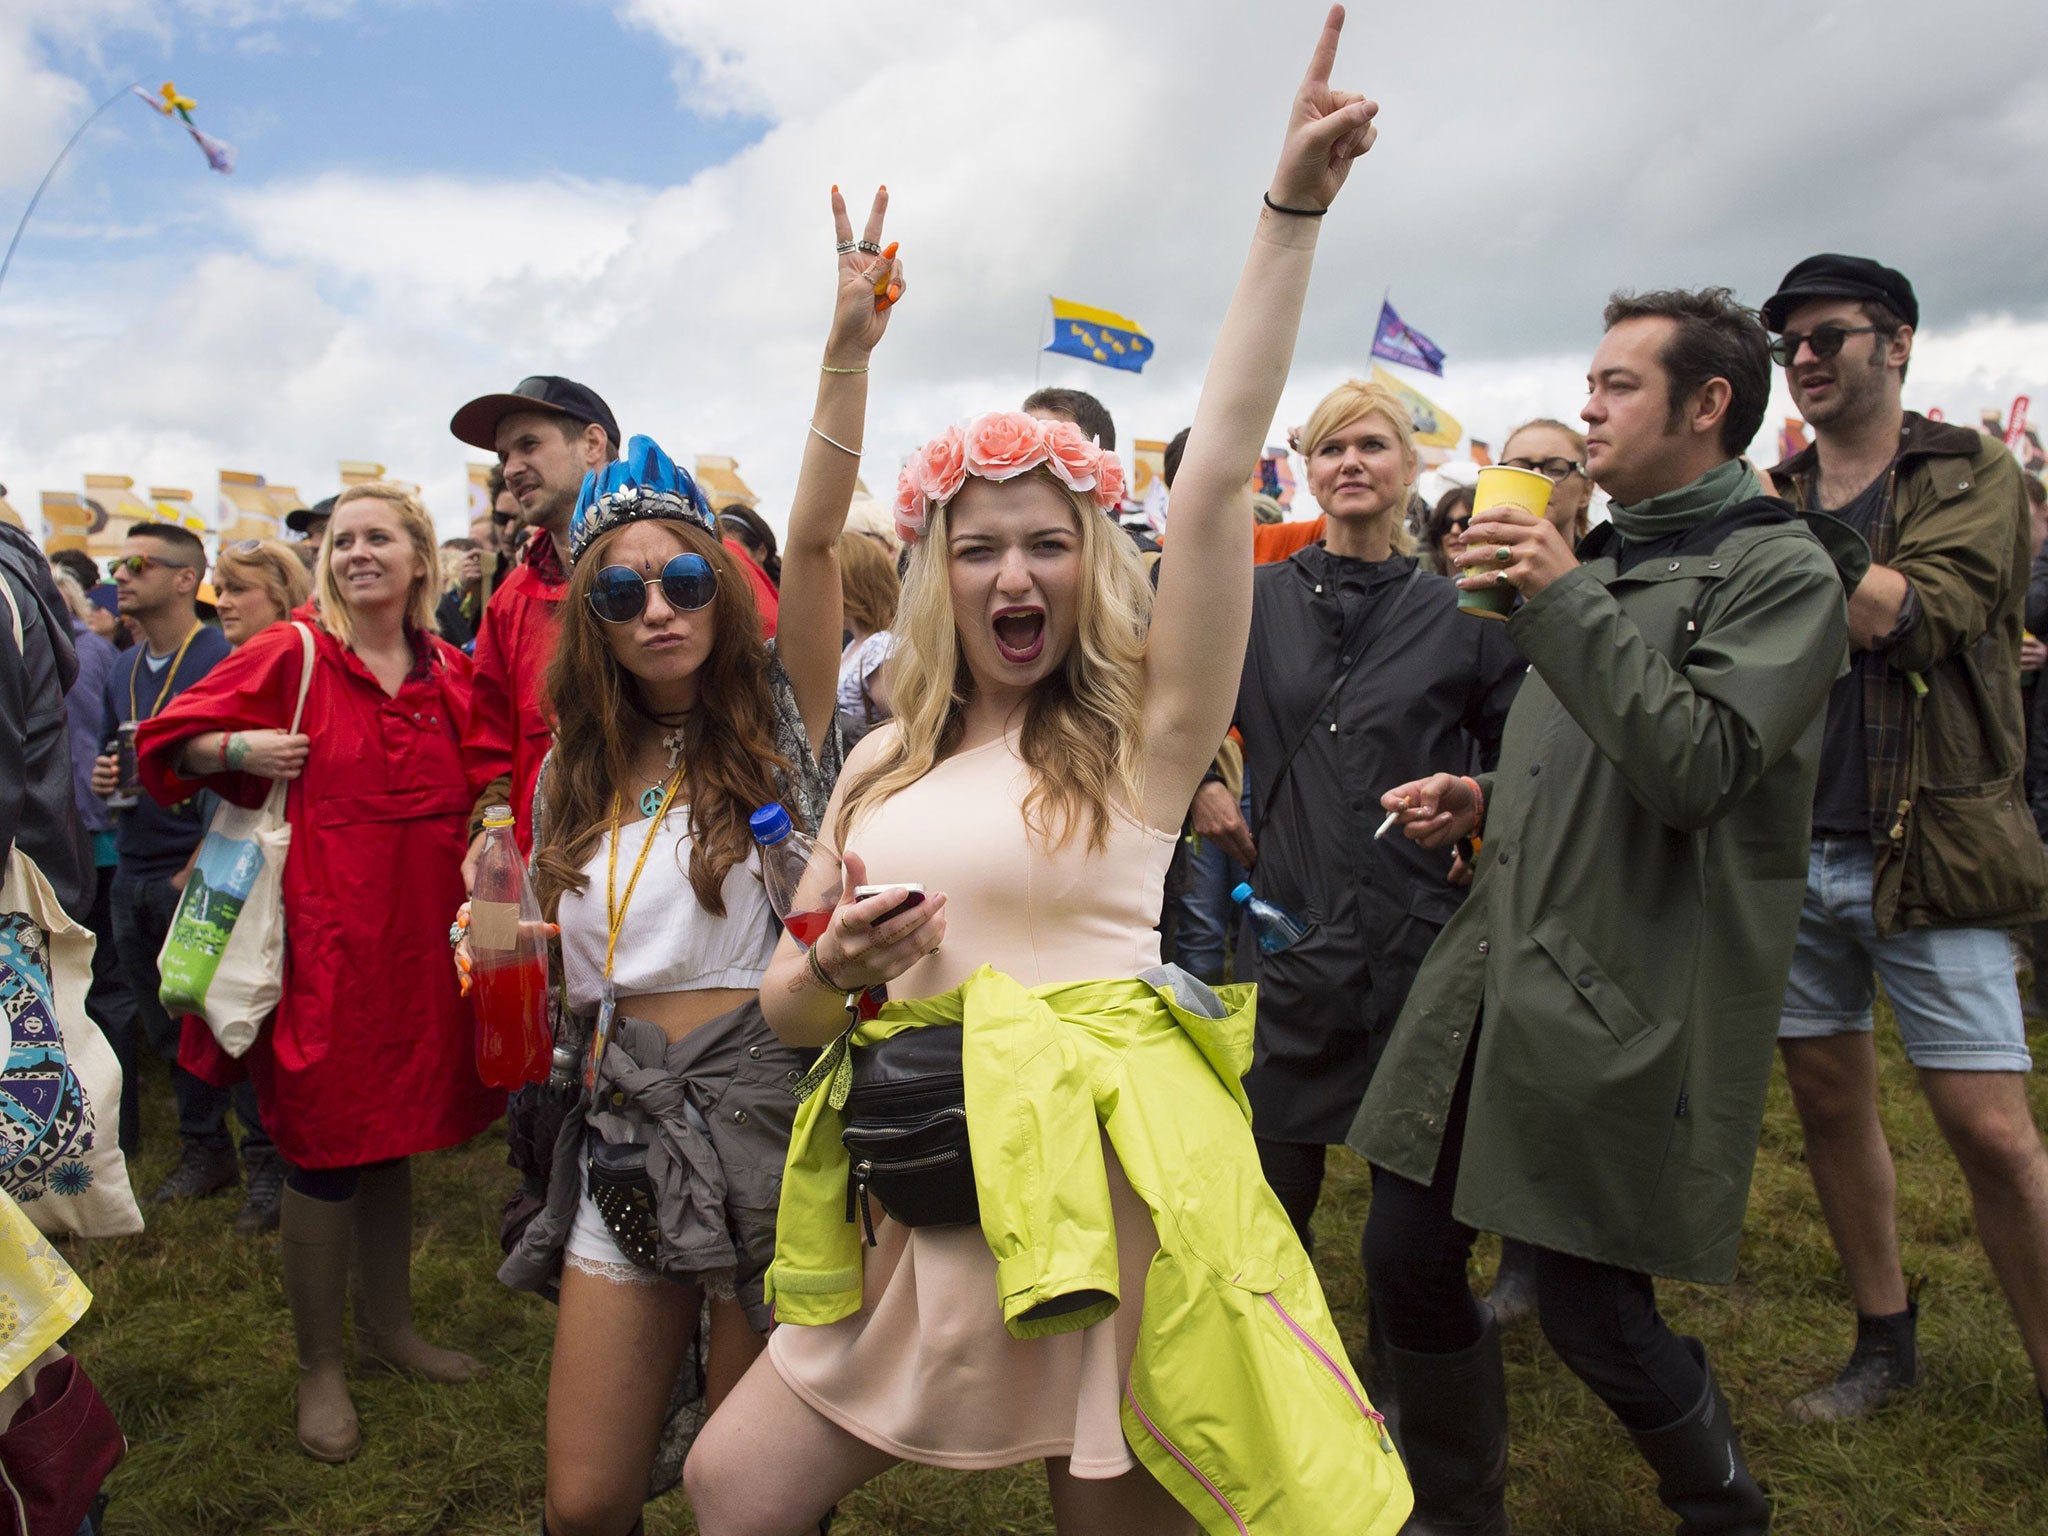 Festival goers at the Glastonbury Festival at Worthy Farm in Somerset